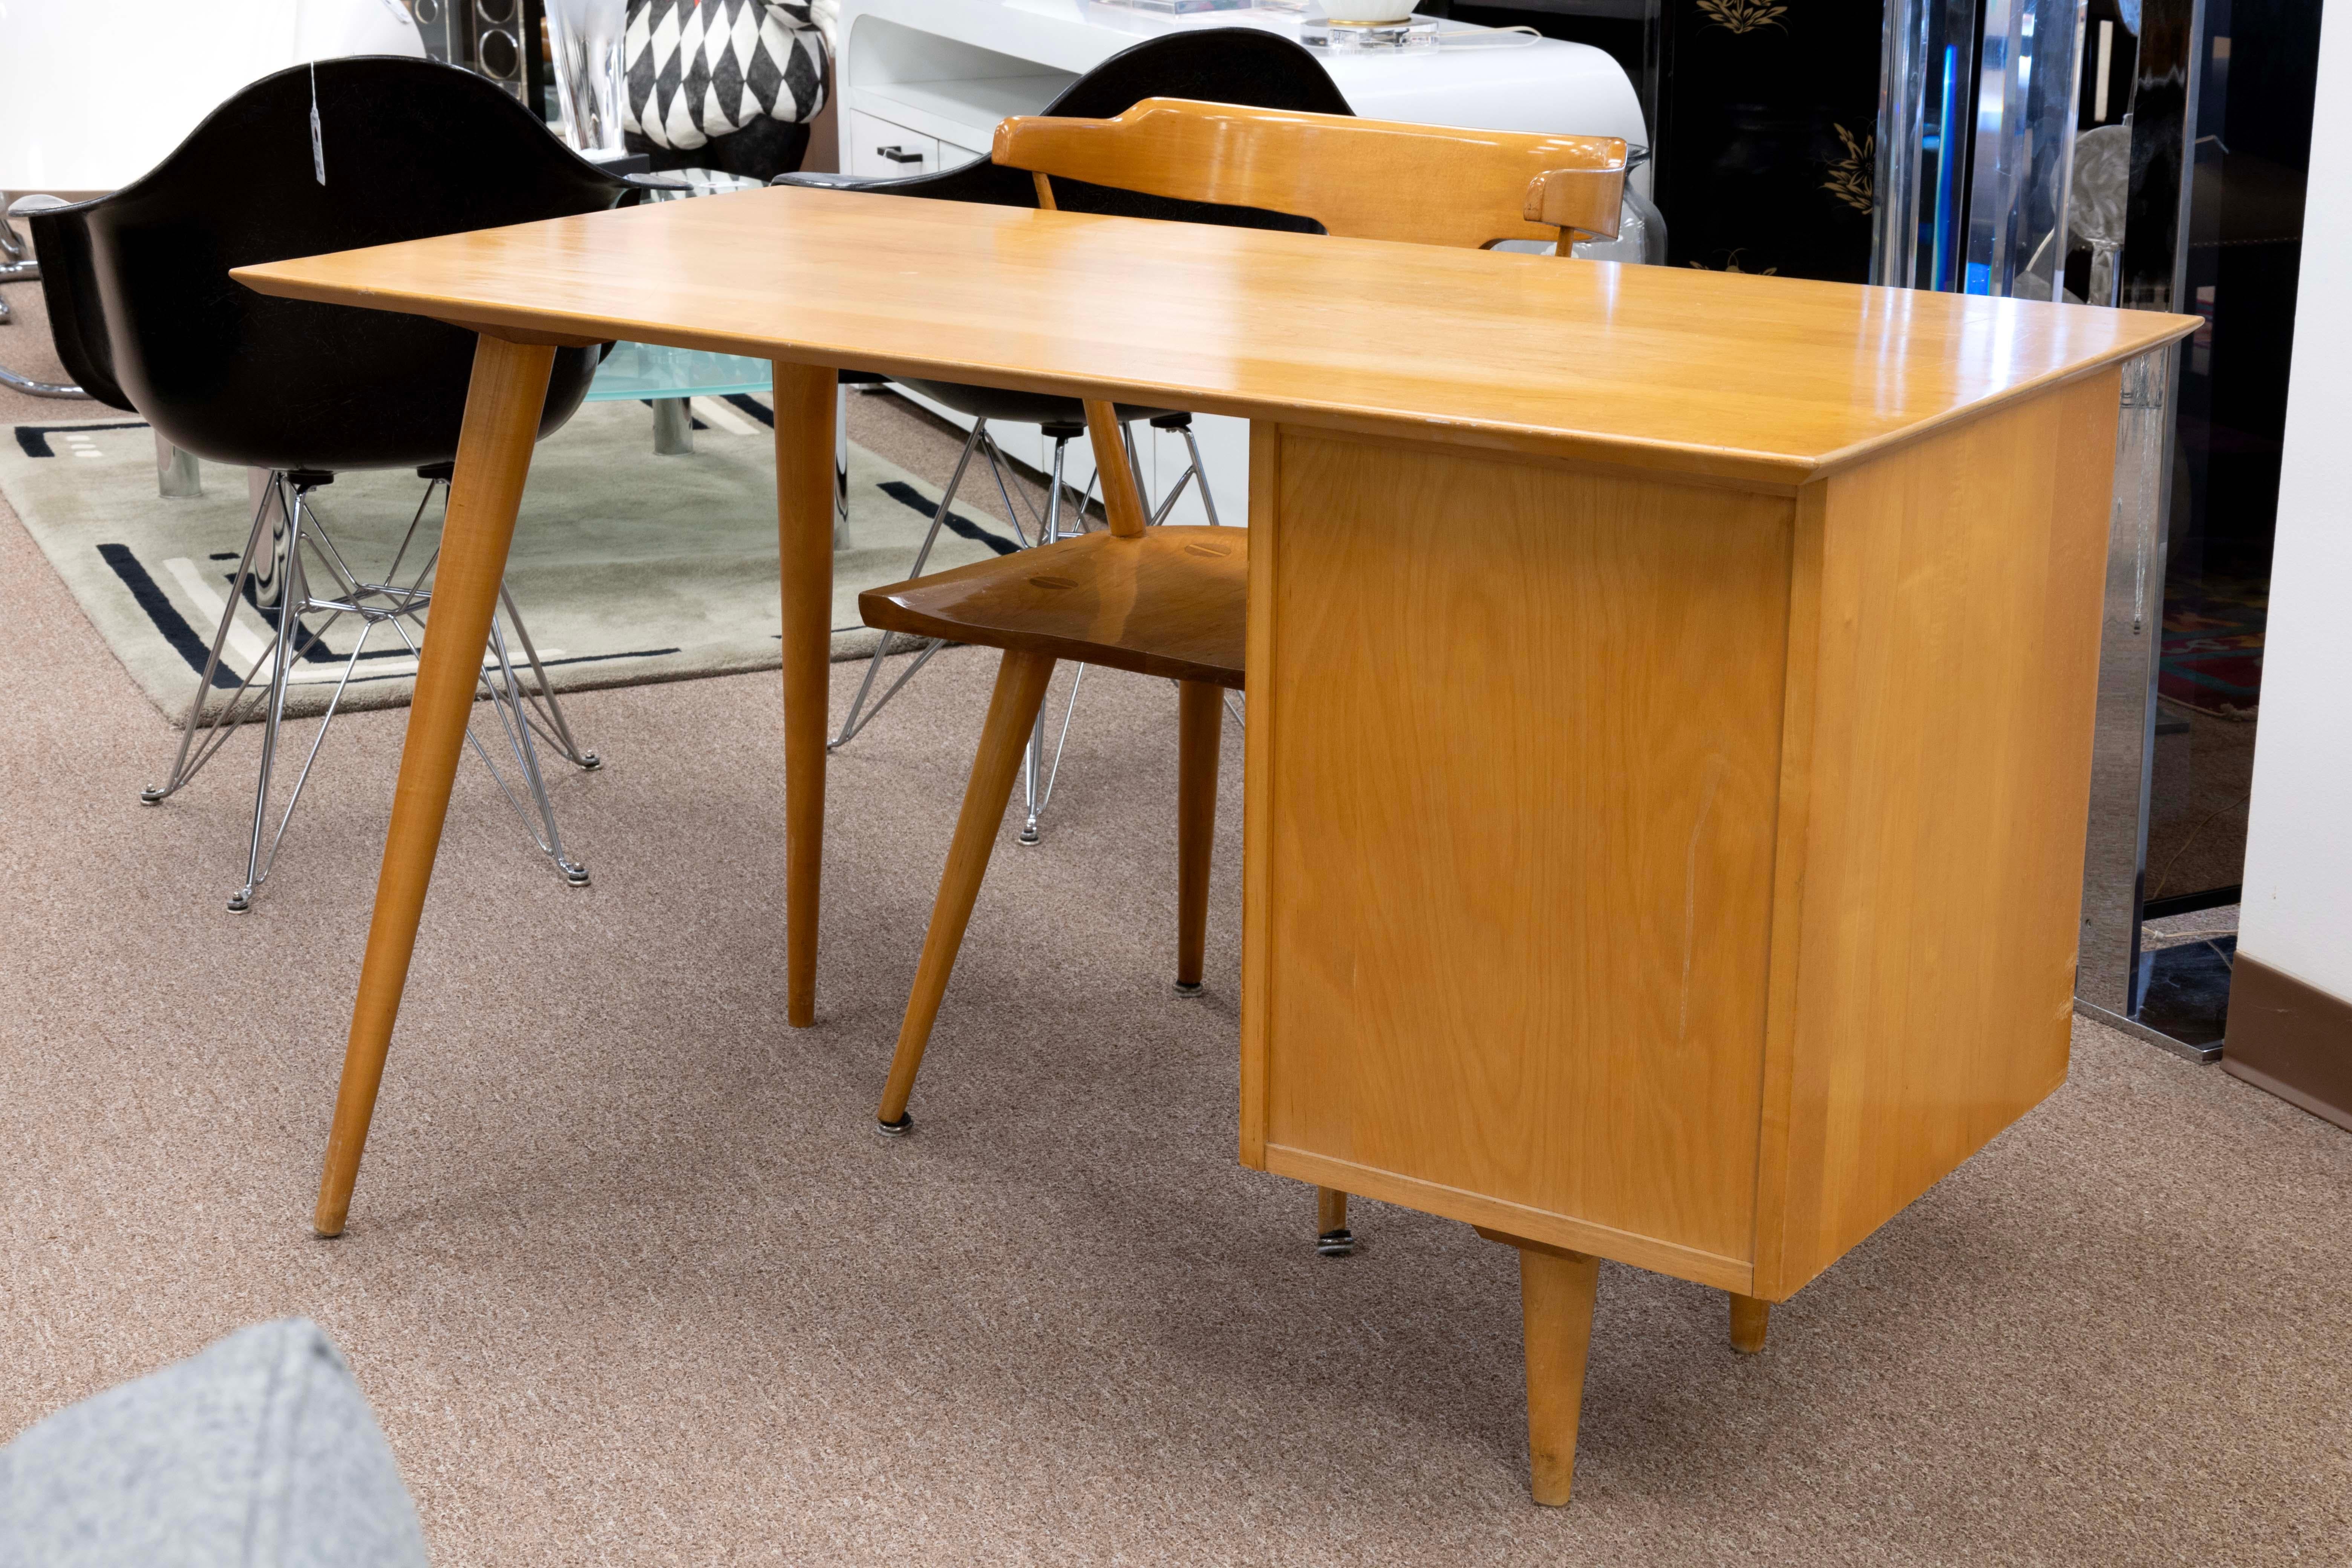 This Classic Mid-Century Modern Paul McCobb planner desk and chair is a timeless piece that will never go out of style. The desk features an maple wood top with two drawers for convenient storage space. The drawers are framed with solid wood edges